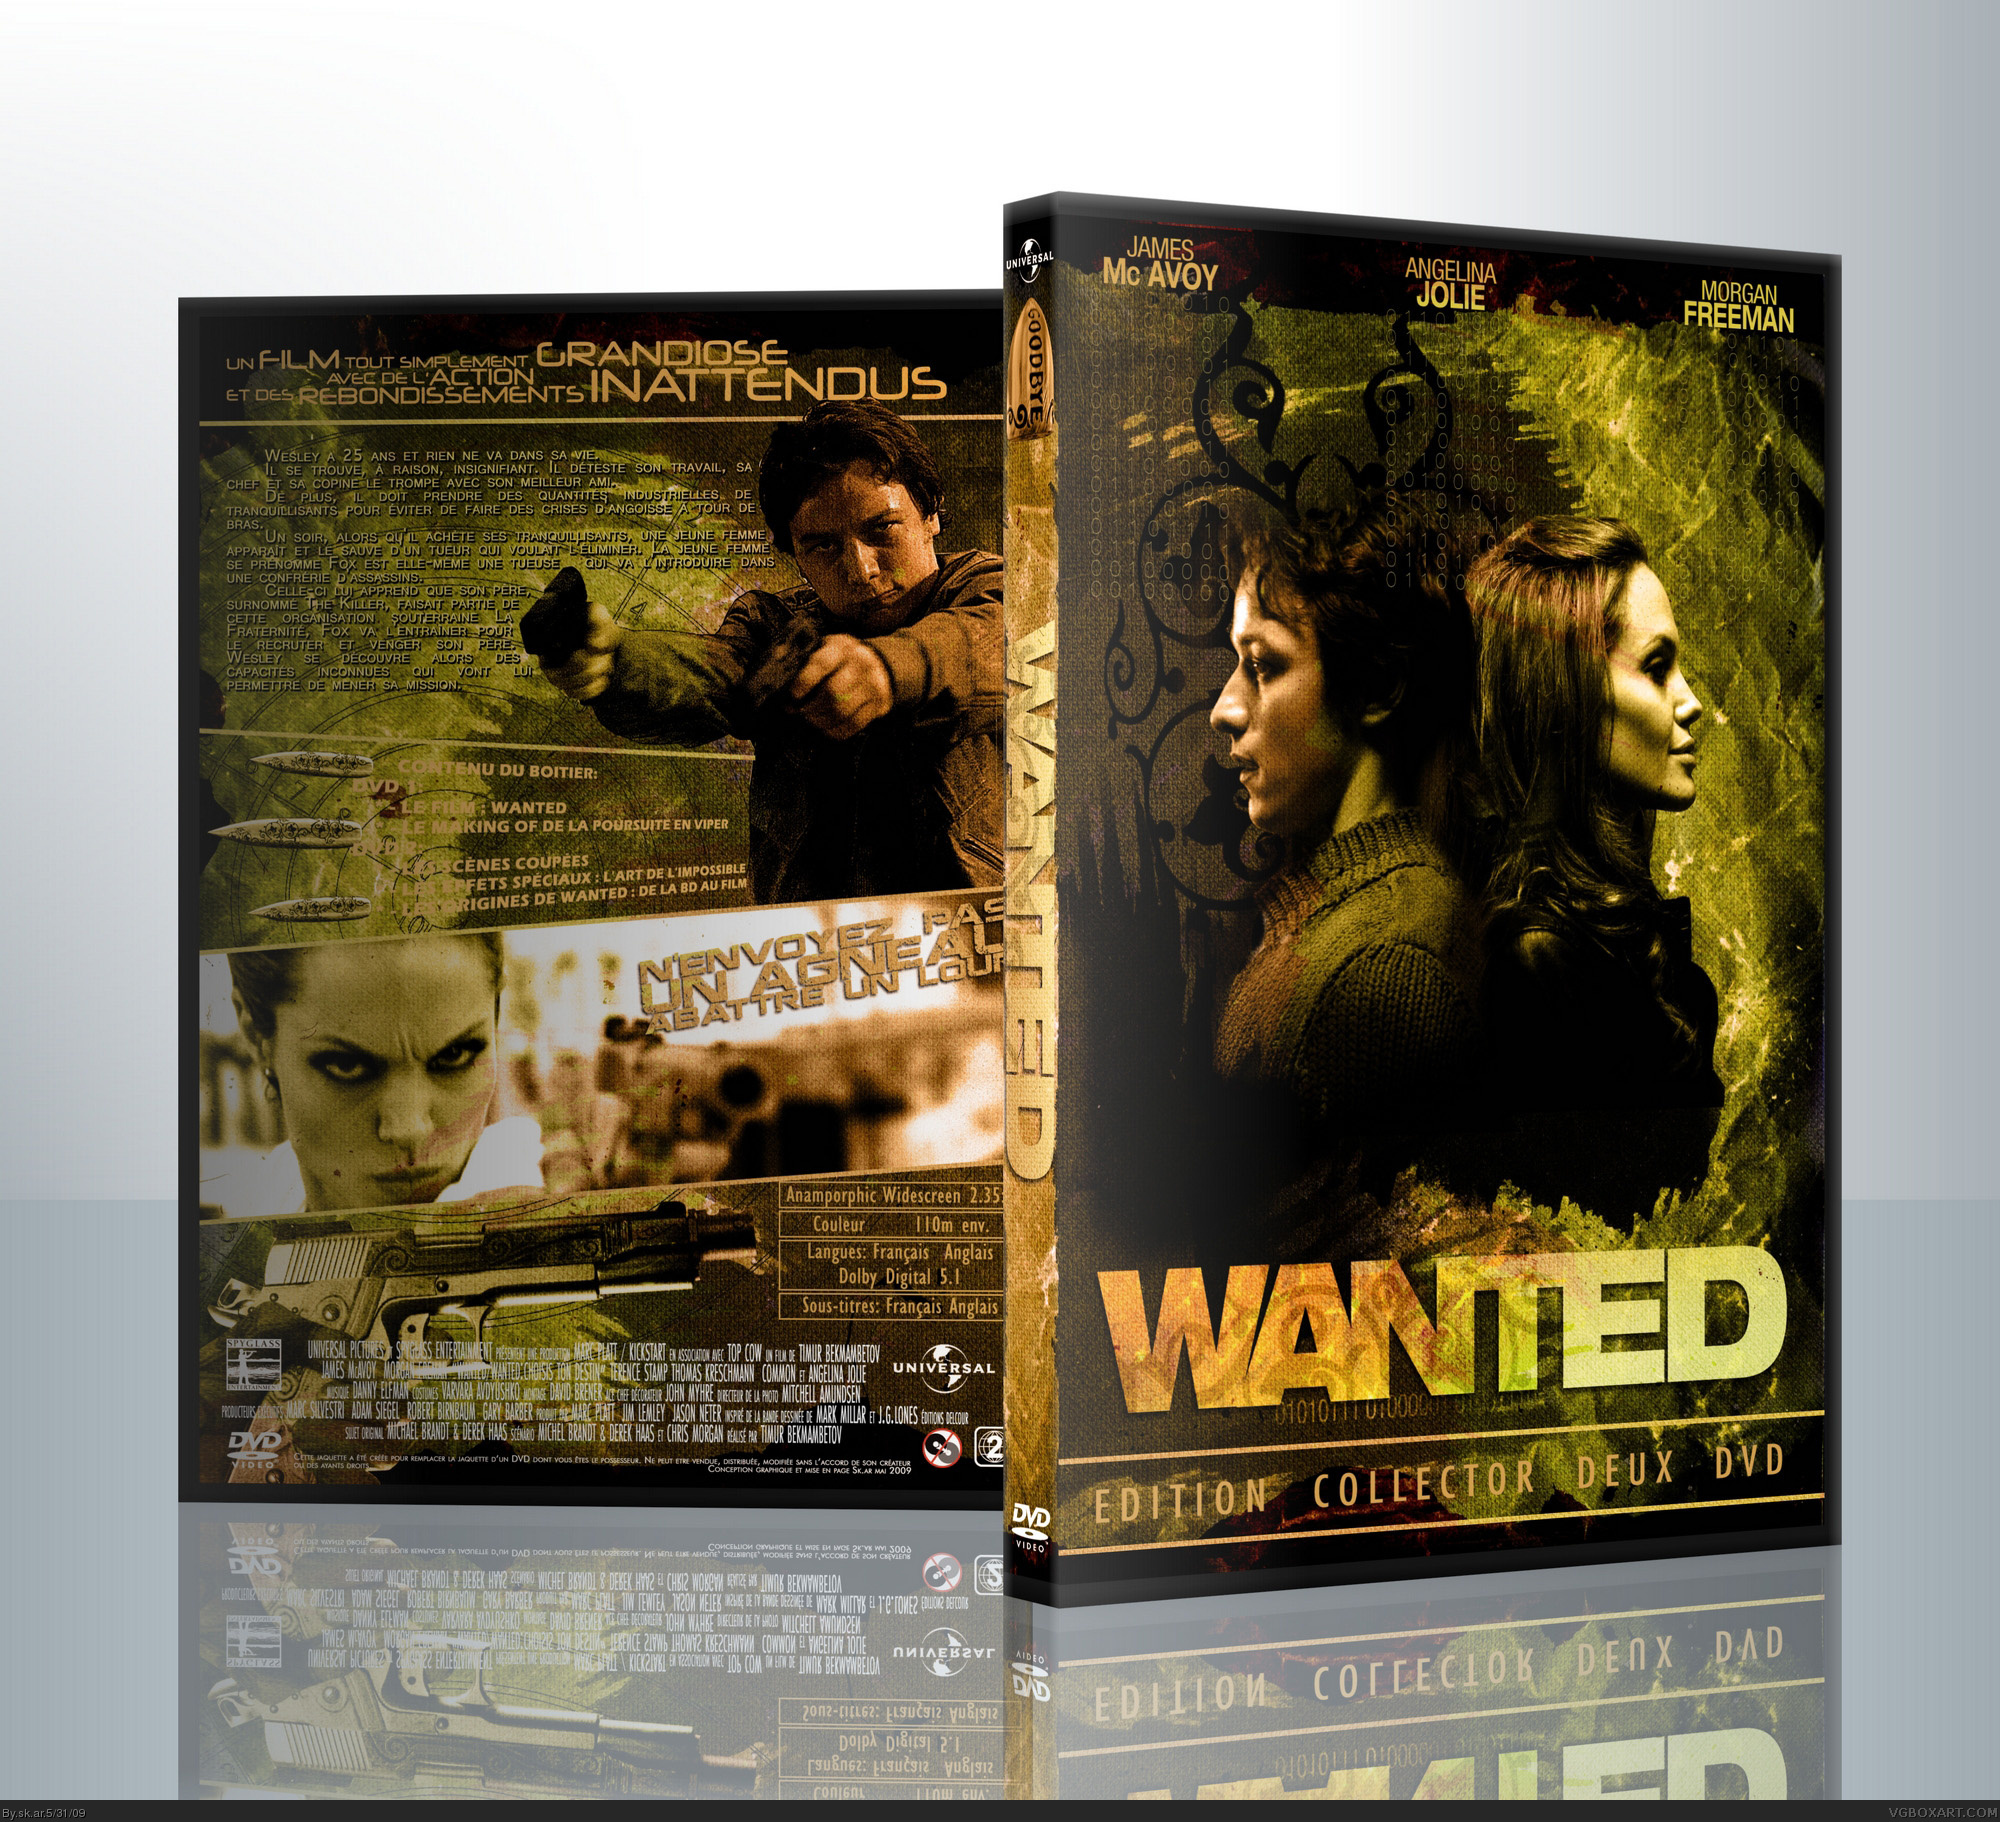 Wanted box cover